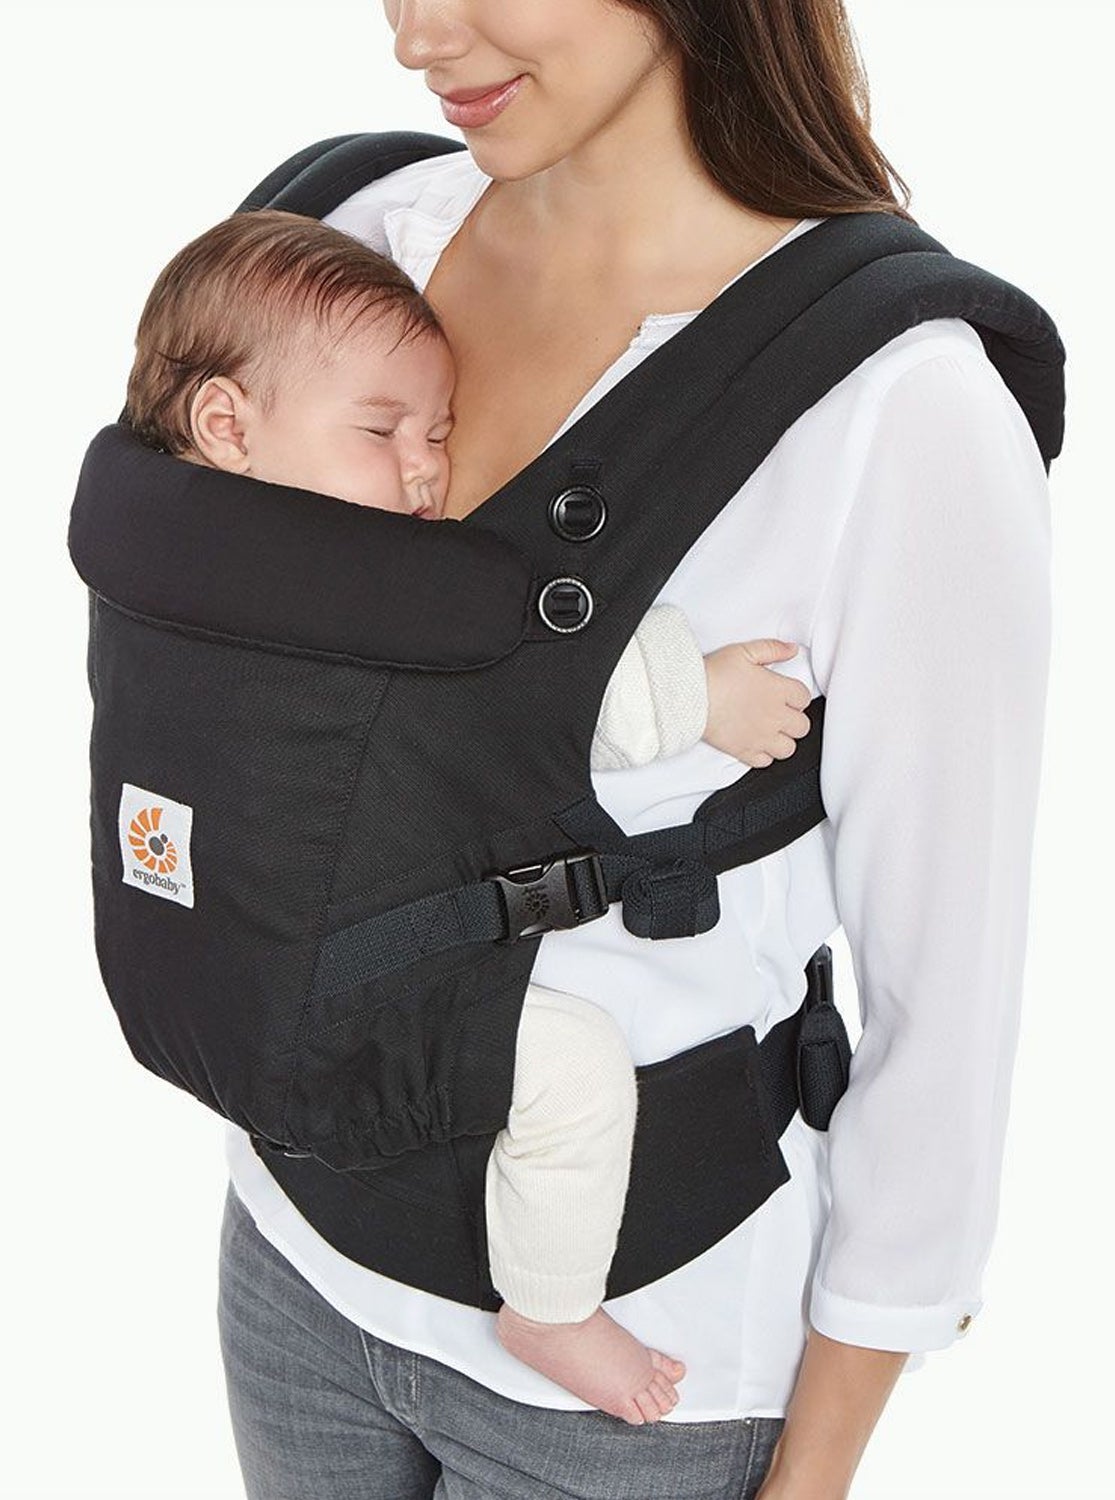 ERGOBABY Adapt Baby Carrier - ANB Baby -Baby Carrier